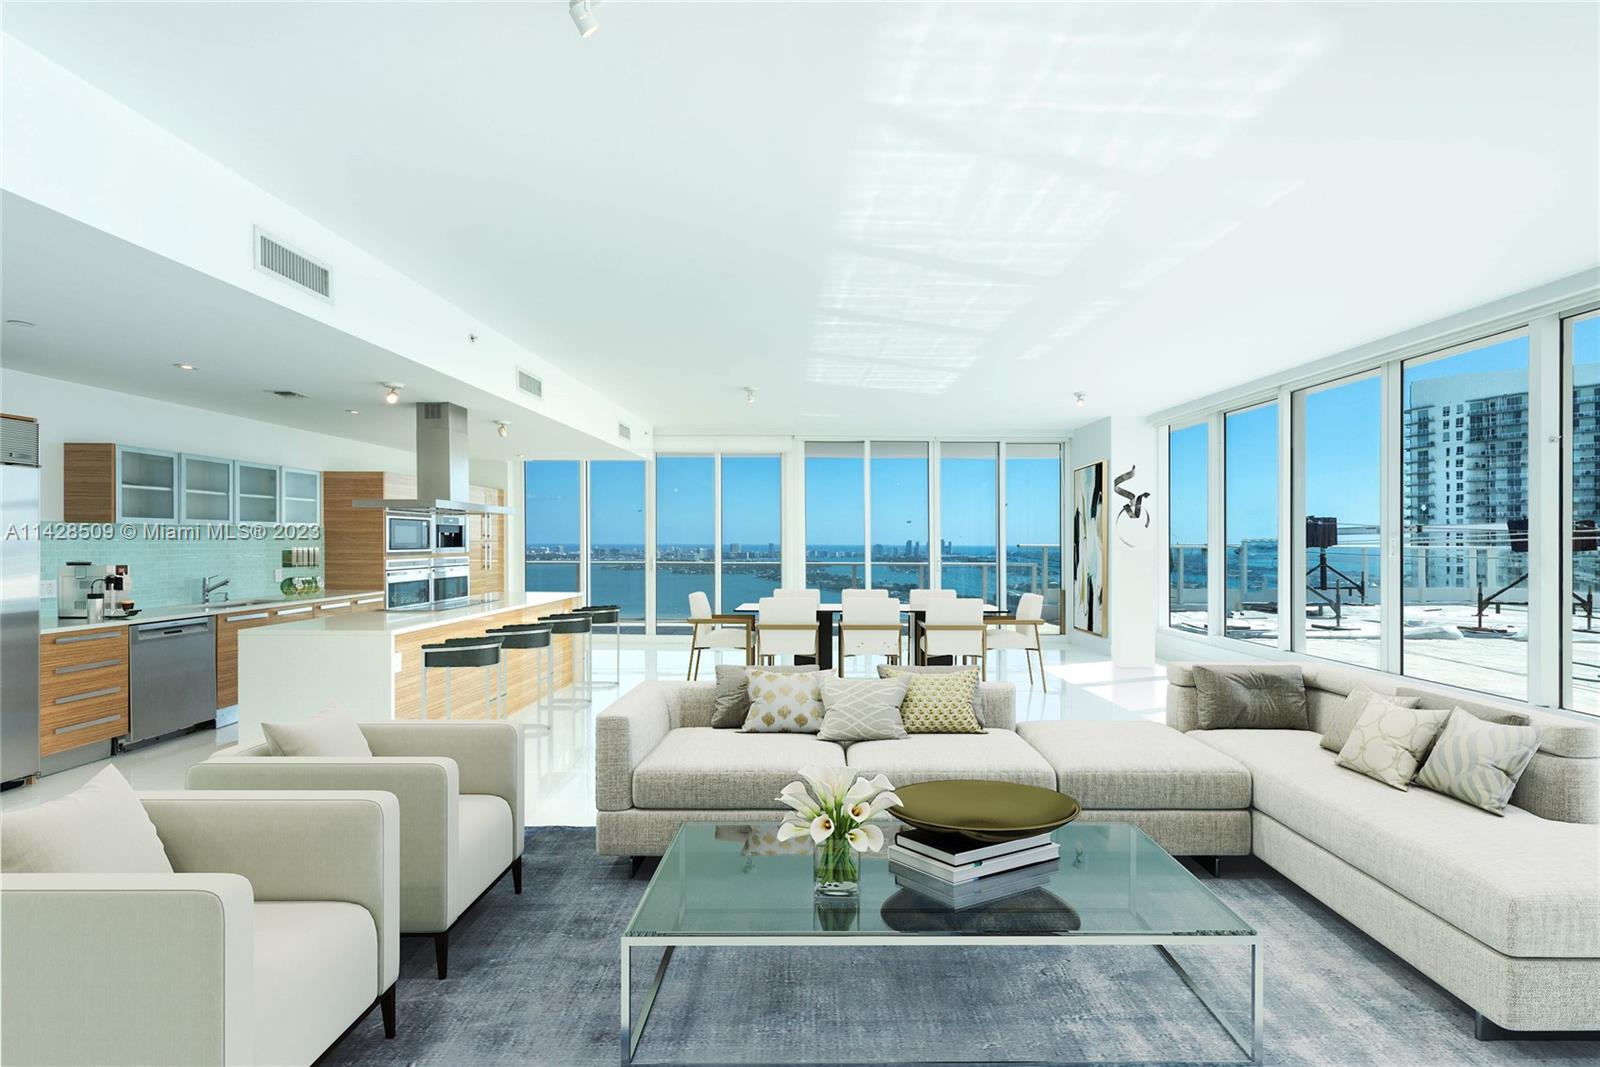 Rarely available, modern Penthouse in Paramount Bay Edgewater, with a private, 2,000-sf terrace offering incredible views of Biscayne Bay, Downtown Miami skyline, and western sunset views. This immense, 5-bedroom 5.5-bath luxe residence features floor-to-ceiling glass walls that allow maximum exposure of panoramic water and city views throughout all living spaces, open concept gourmet kitchen, oversized bedrooms with en-suite baths and walk-in closets, private elevator, and more. Live life on the water in Miami’s trendy neighborhood, Edgewater – ideally located between Miami Design District, Midtown Miami, Downtown Miami, and Miami Beach. Paramount Bay is a luxe condominium with 2 pools, 2-story 6,000-sf fitness center with spa, valet, and 24-h security. Available for lease at $19,995/mo.